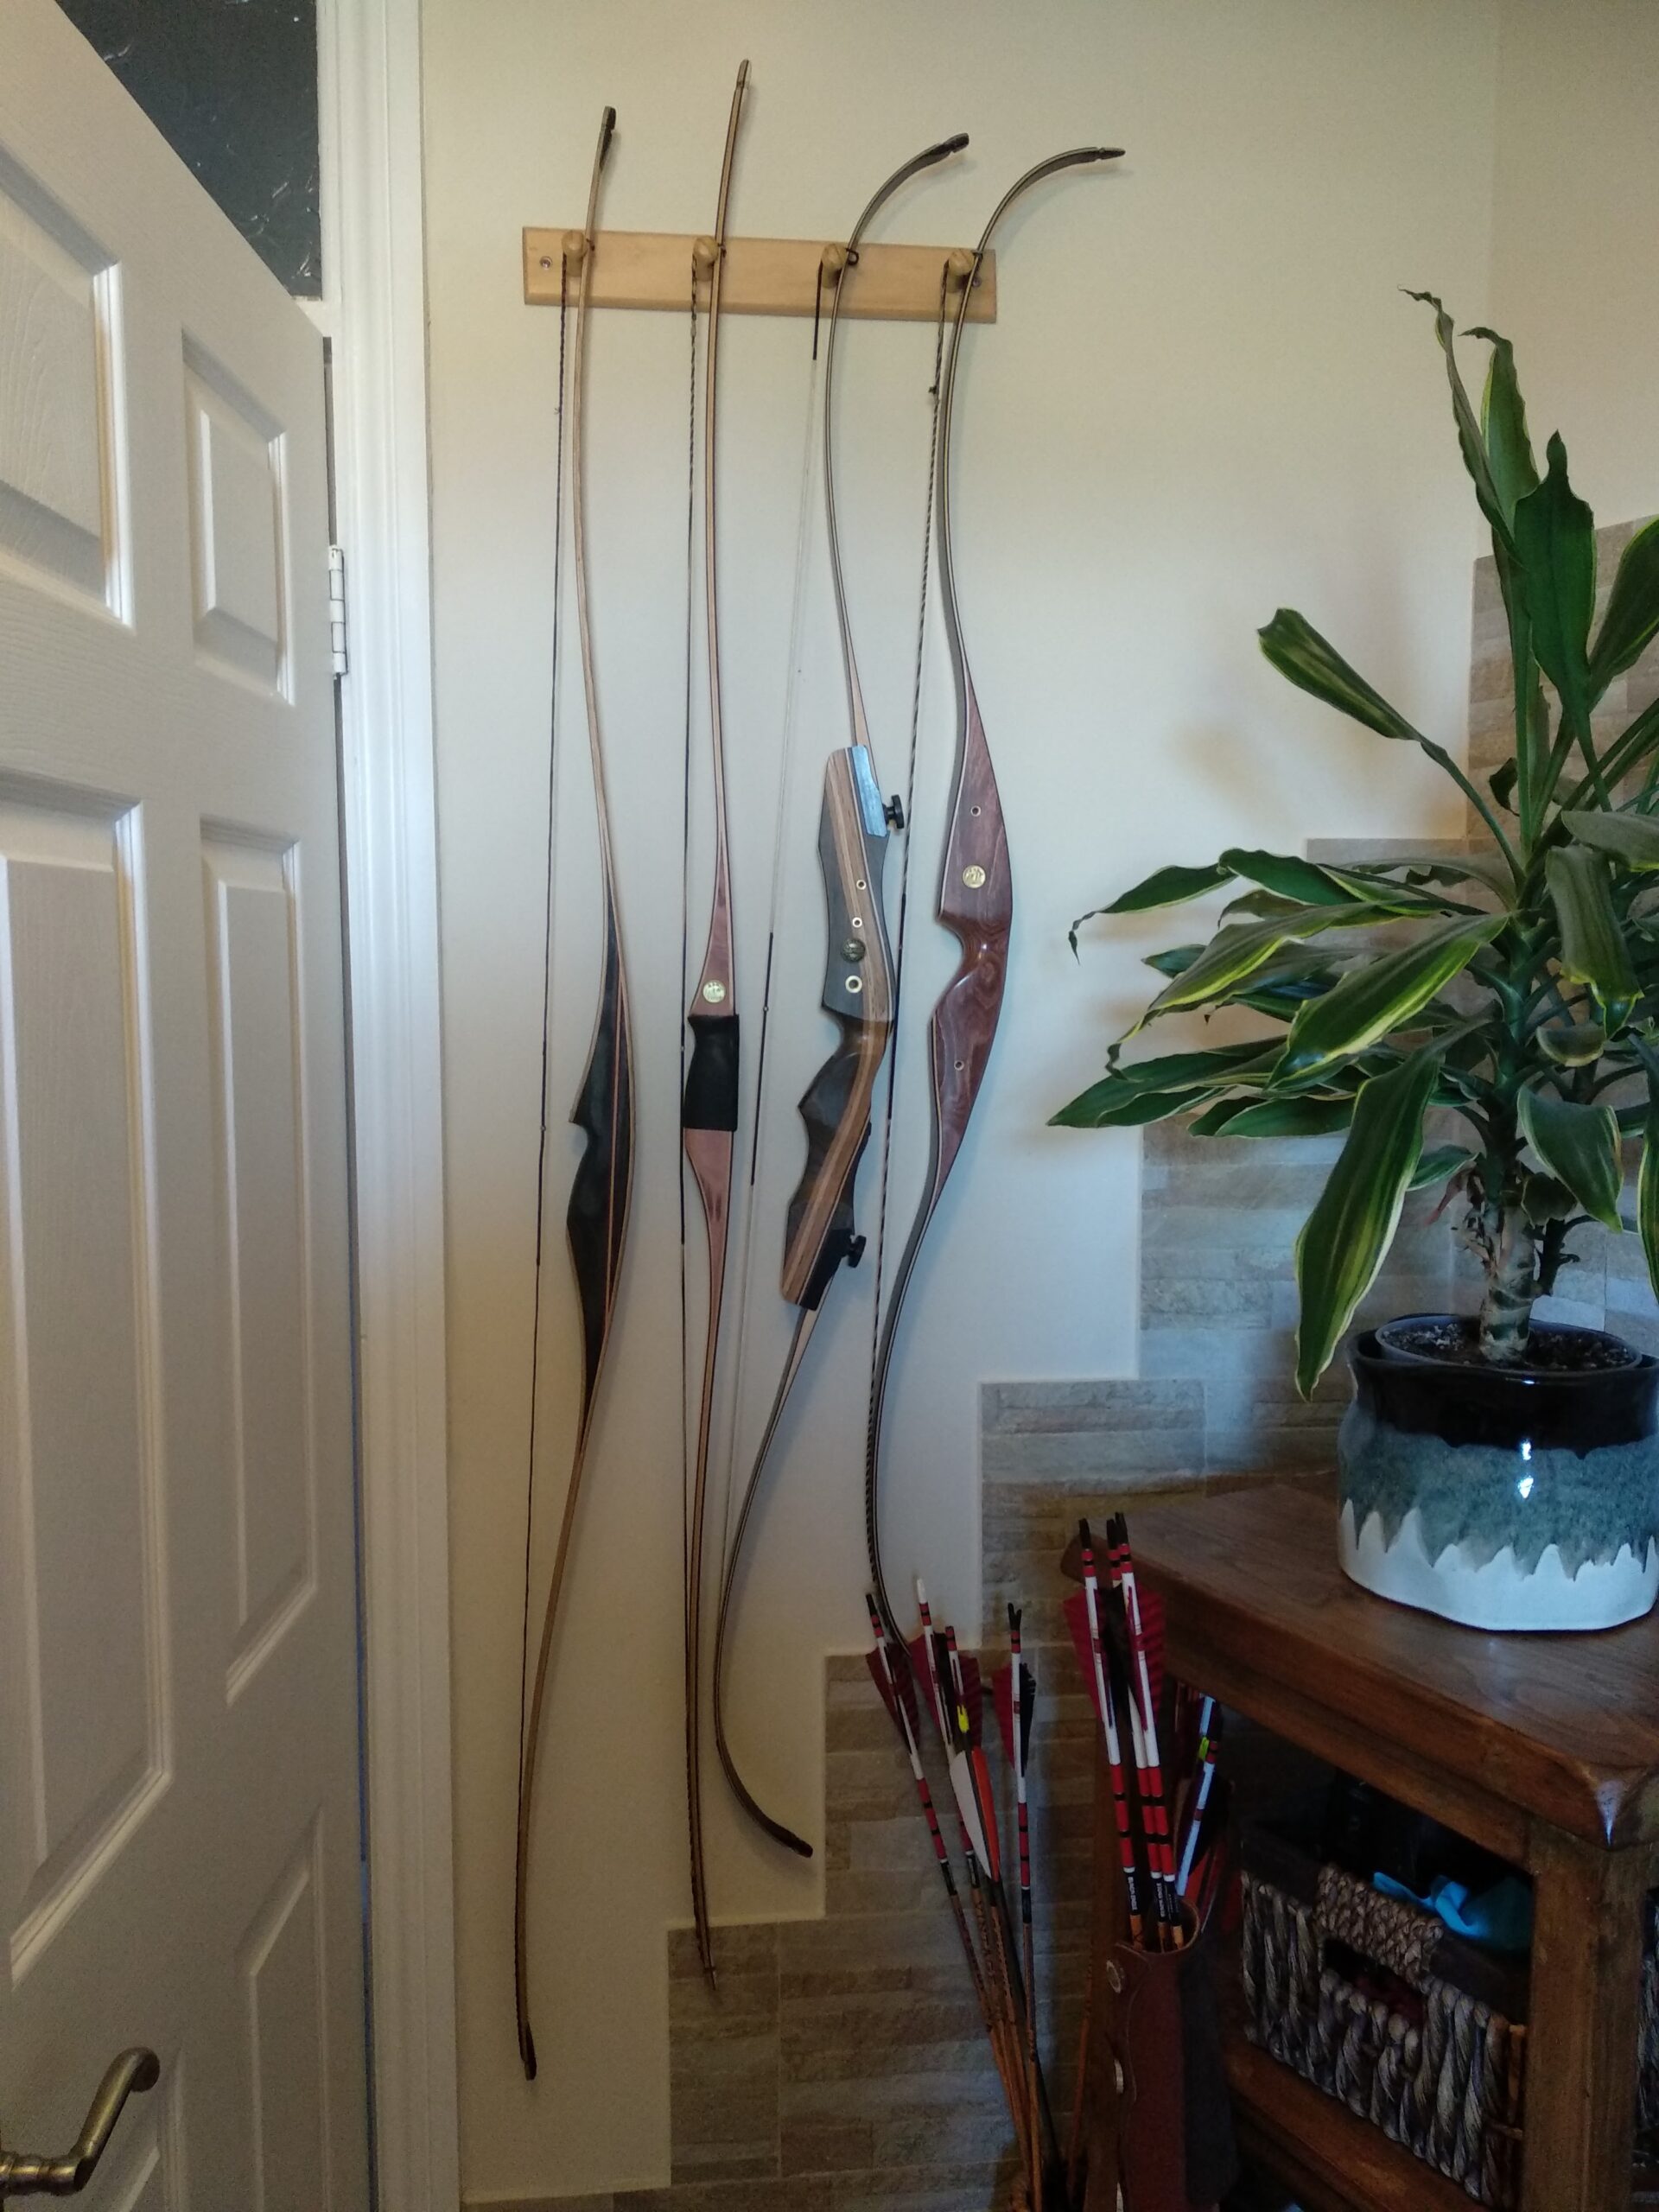 Archery Equipment - bows on the walls | Old Bald Man